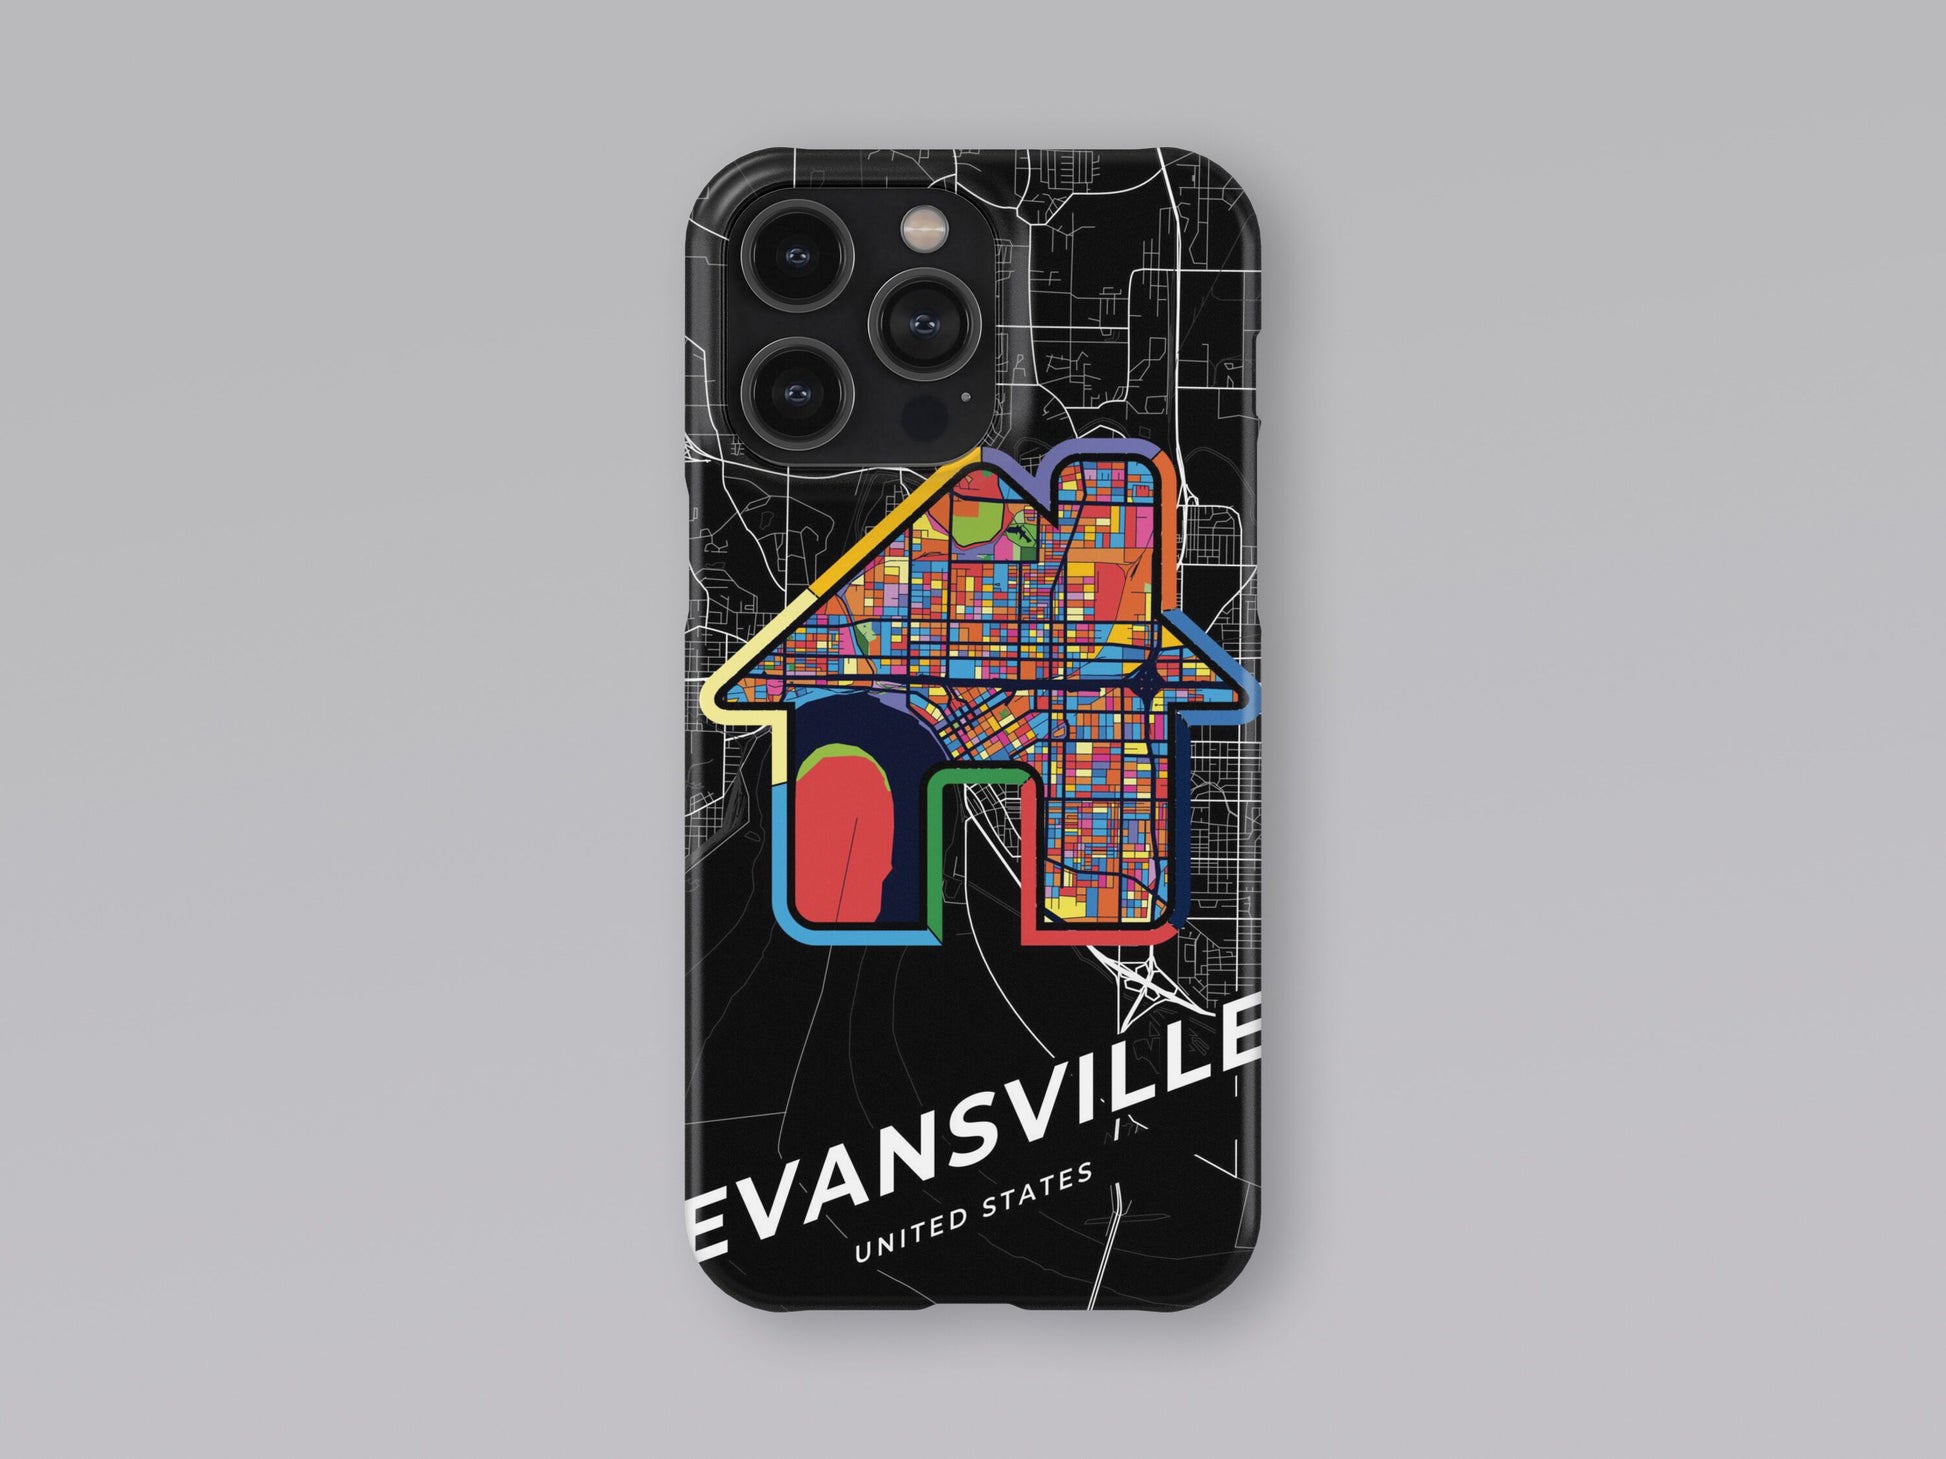 Evansville Indiana slim phone case with colorful icon. Birthday, wedding or housewarming gift. Couple match cases. 3